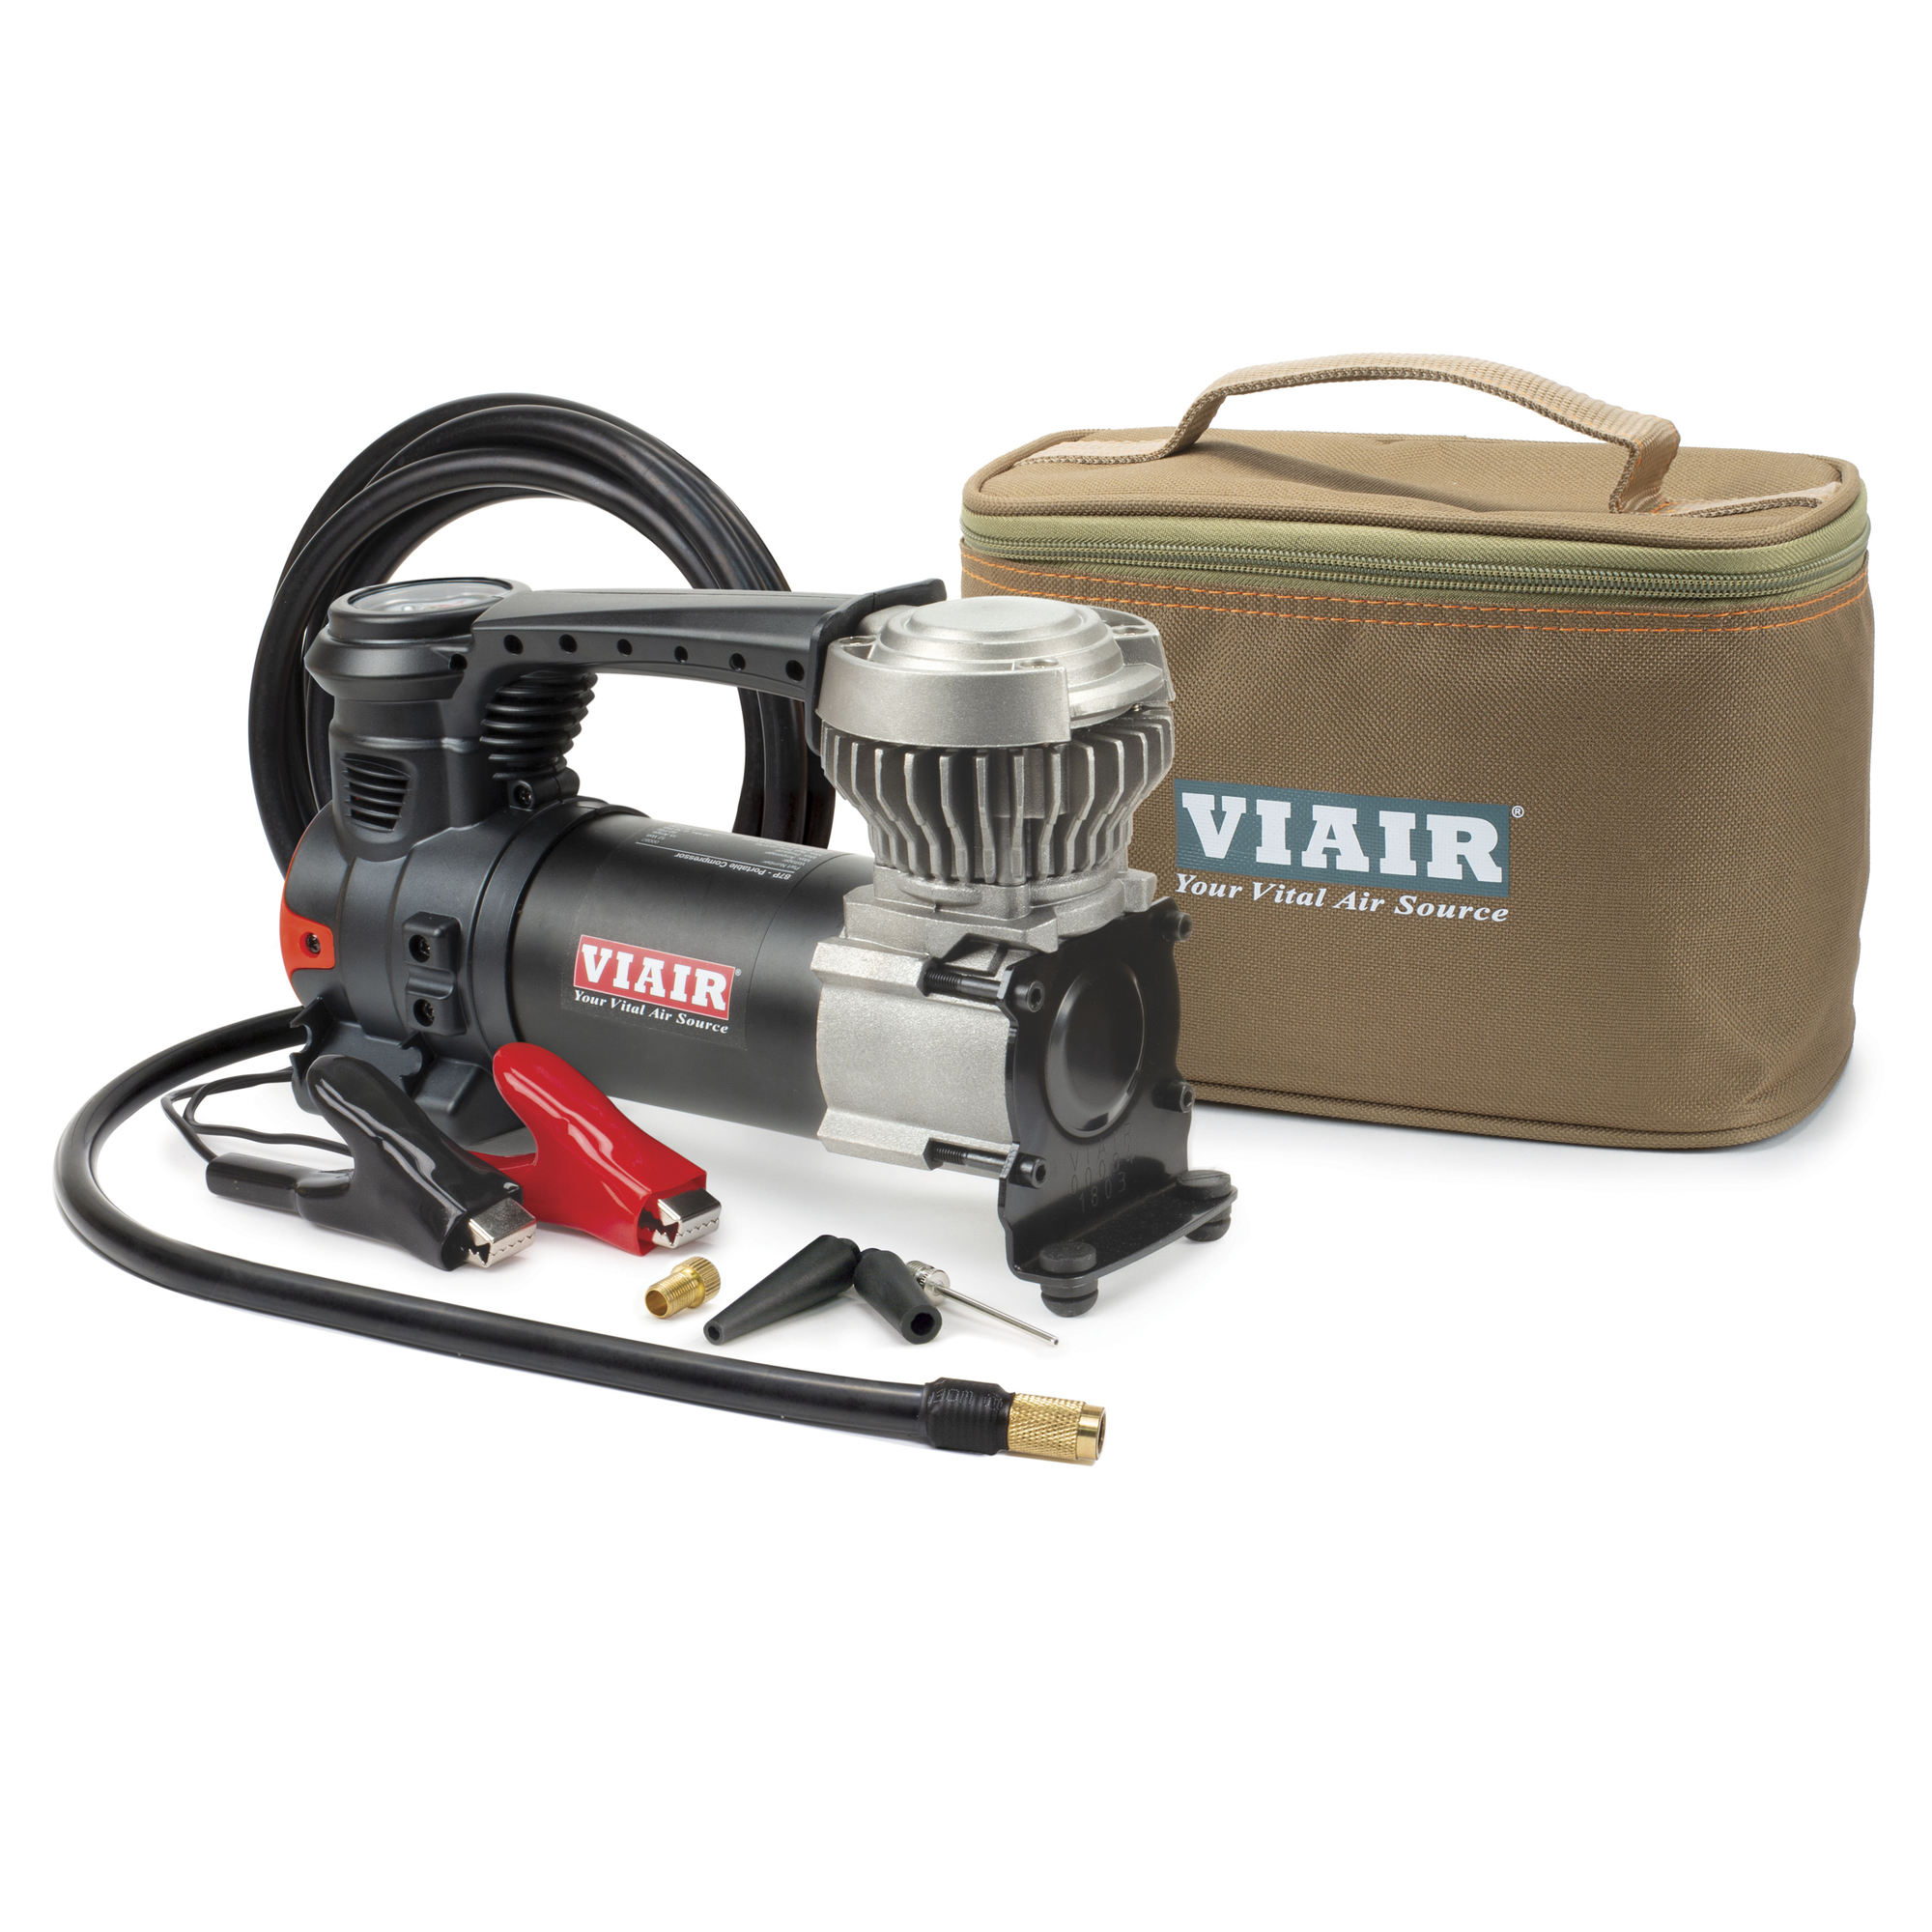 Viair, 87P Portable Air Compressor Kit, Max. PSI 60, Power Source Electric,  Model# 00087 Northern Tool